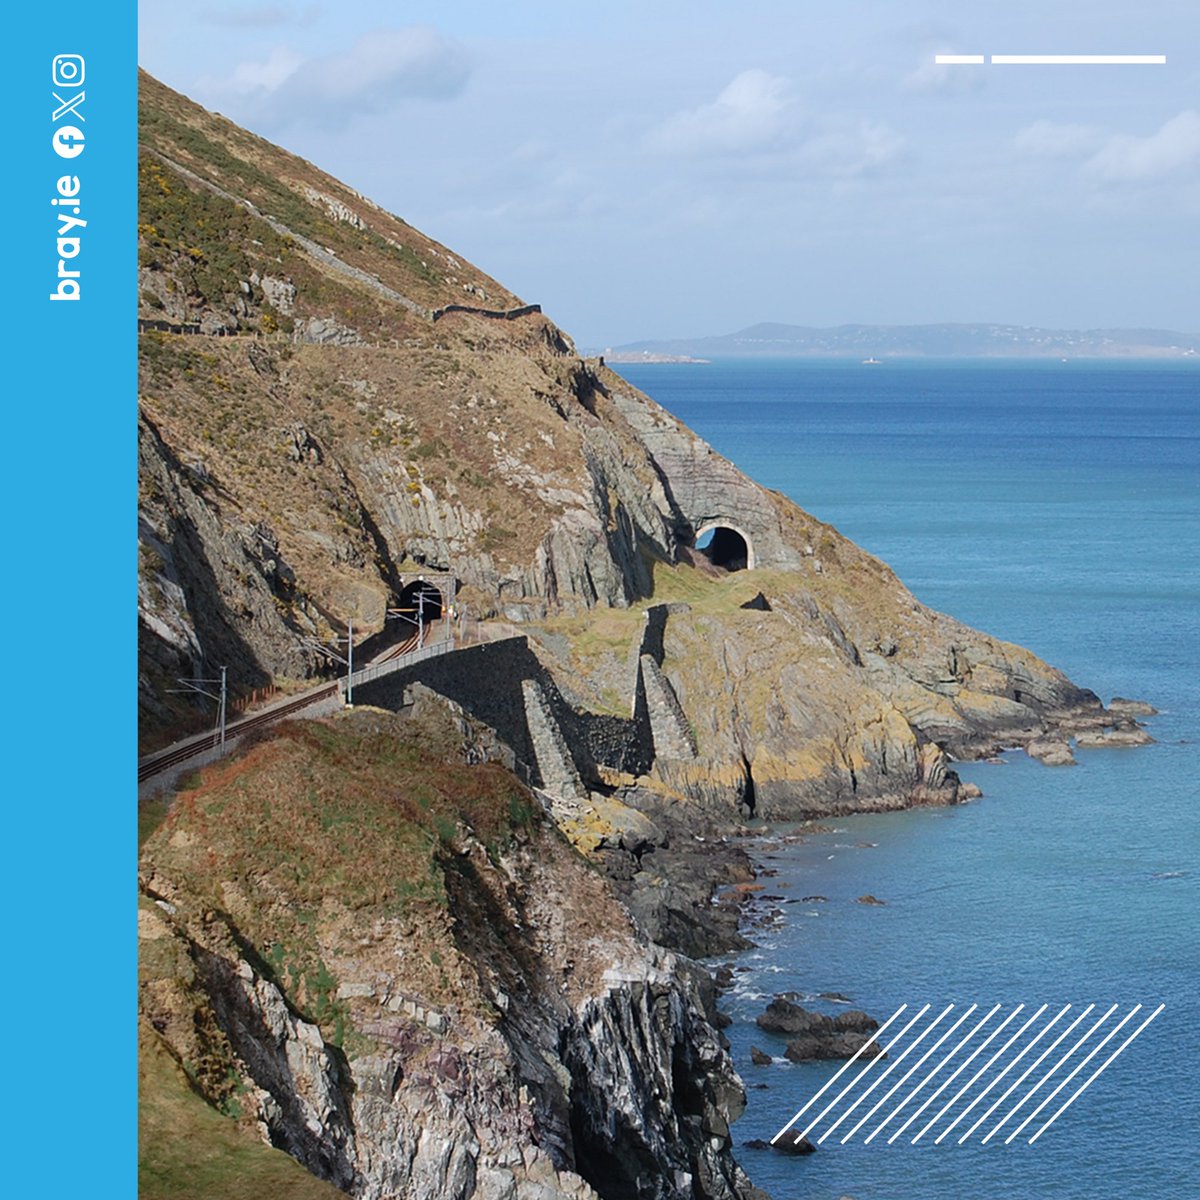 Reminder! 

The #Bray to #Greystones #CliffWalk remains closed. However, there are still other ways to enjoy the great outdoors. Have you considered exploring the #Bray Head Loopped Walk as an alternative? 

ℹ︎ ➜ bray.ie/brayheadwalk/

#SummerInBray #LoveBray #LeaveNoTrace